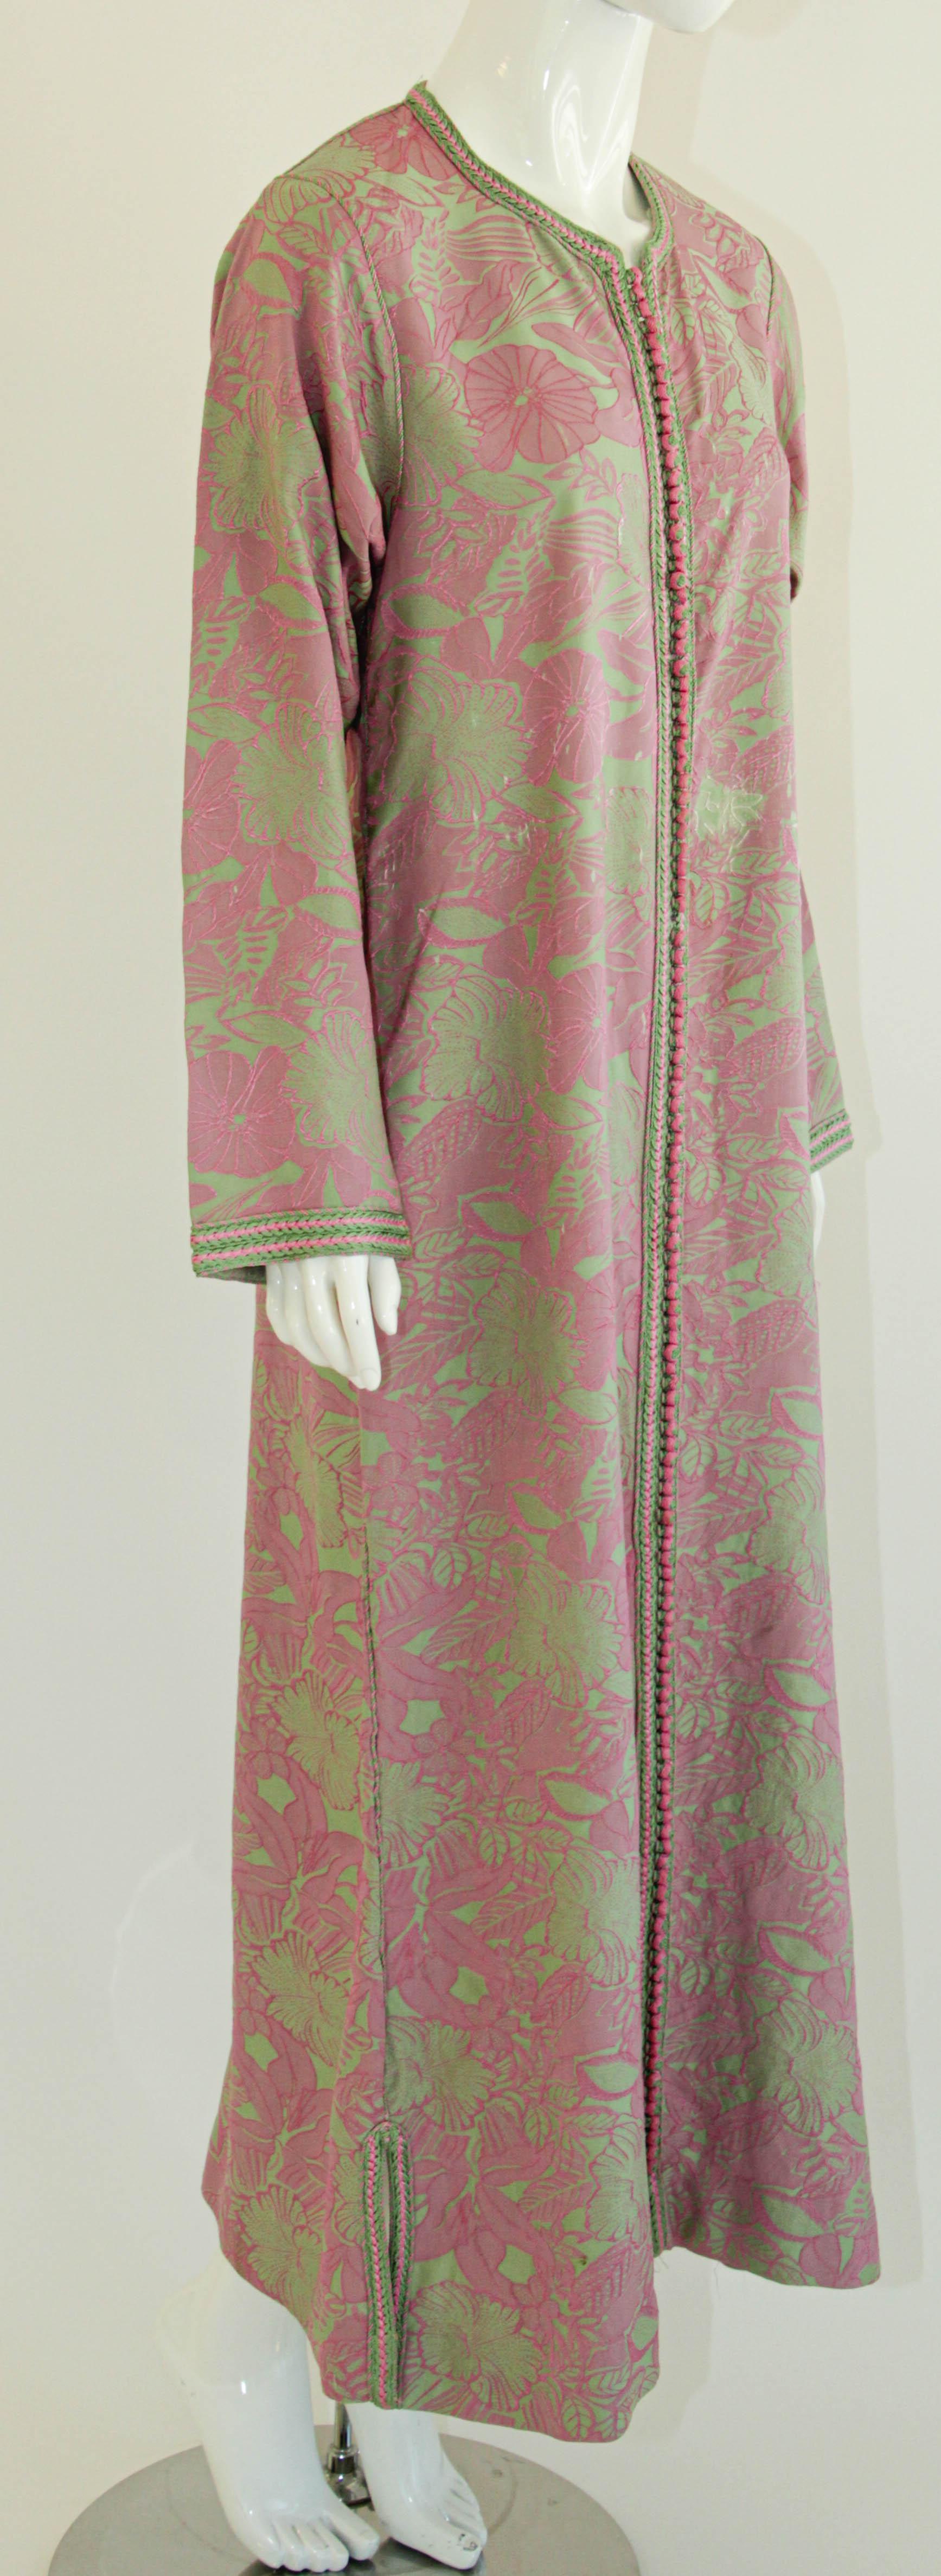 Vintage Moroccan caftan, embroidered with pink and green trim.
This chic Bohemian maxi dress kaftan is embroidered and embellished with pink and green thread trim.
One of a kind, made to measure evening Moroccan Middle Eastern Kaftan gown.
Vintage